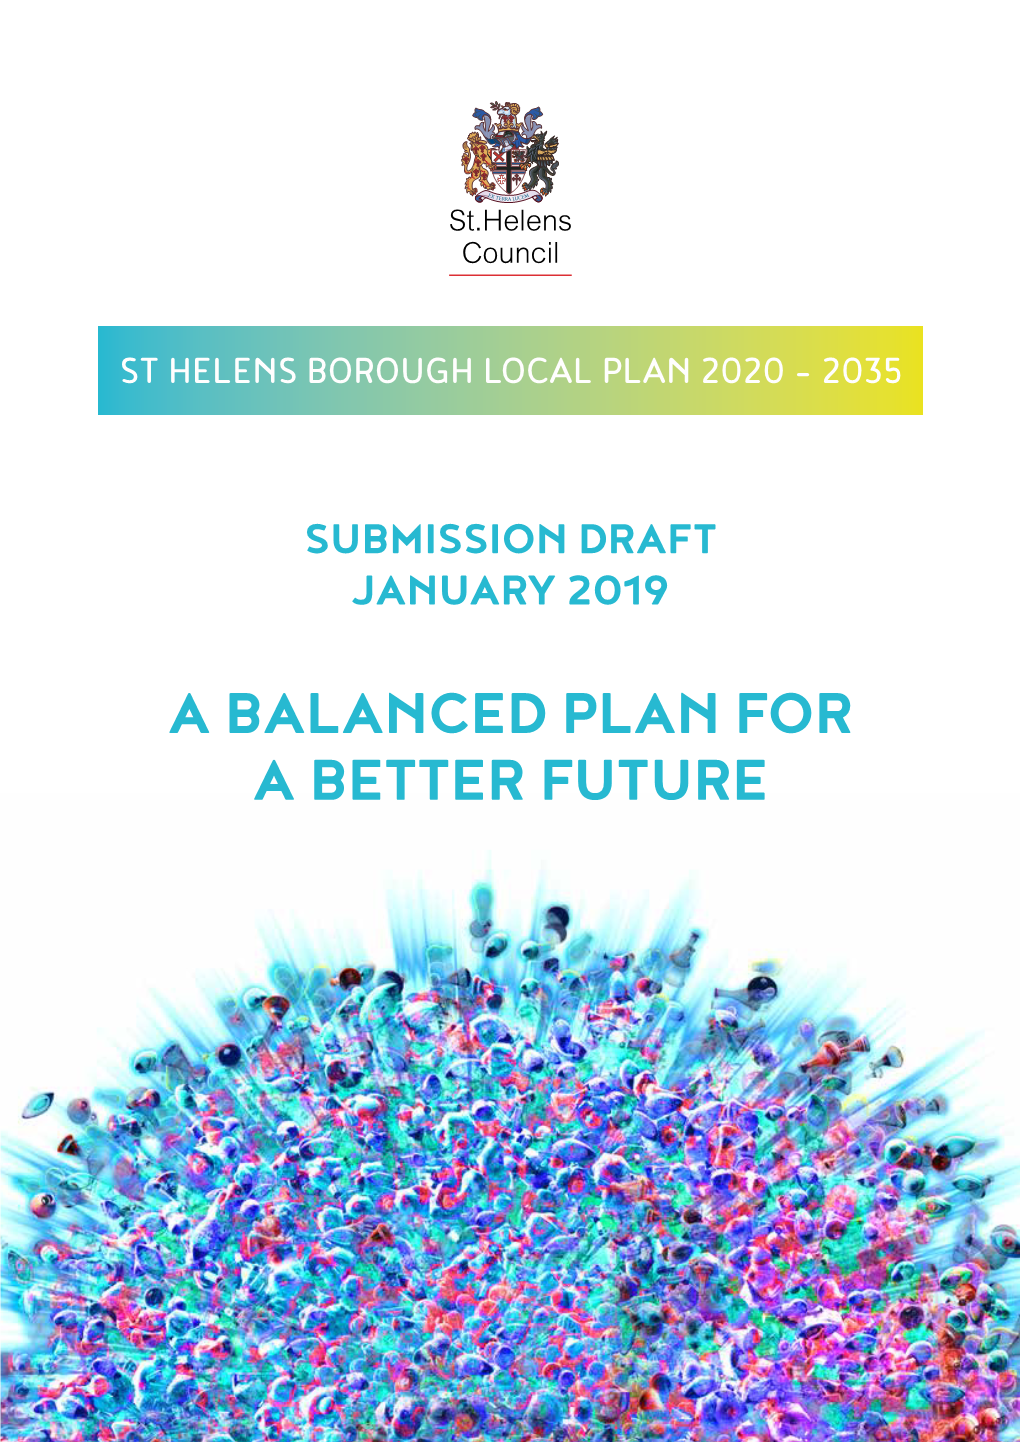 St Helens Borough Local Plan 2020-2035 Submission Draft